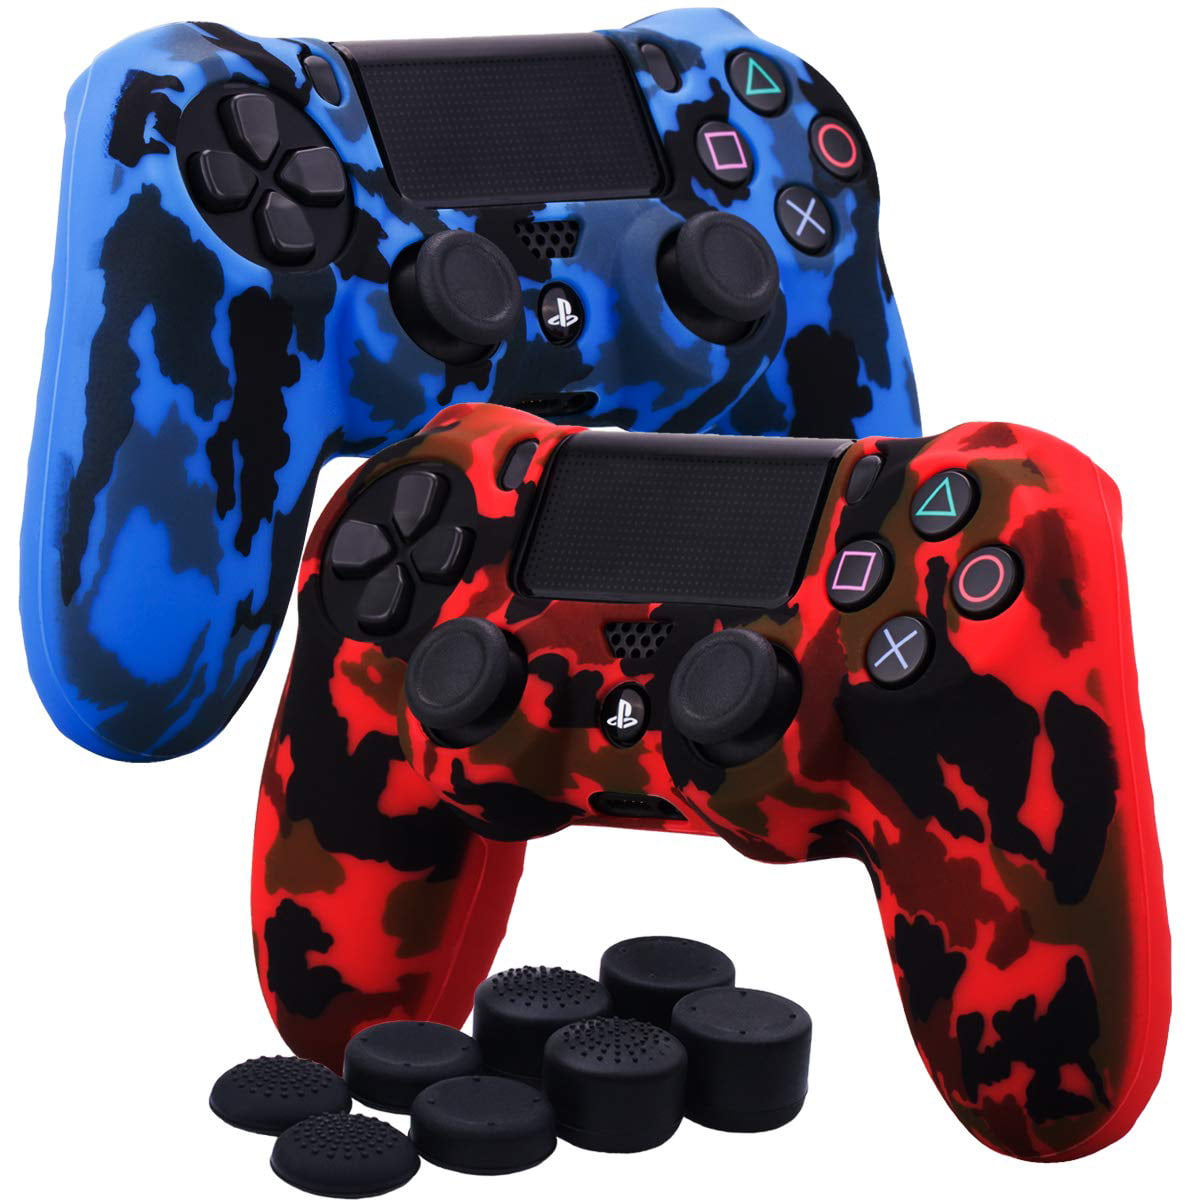 Water Transfer Camouflage Silicone Skin Case for Sony PS4/slim/Pro Dualshock 4 Controller x 2 red+Blue with Pro Thumb Grips x 8 - Walmart.com